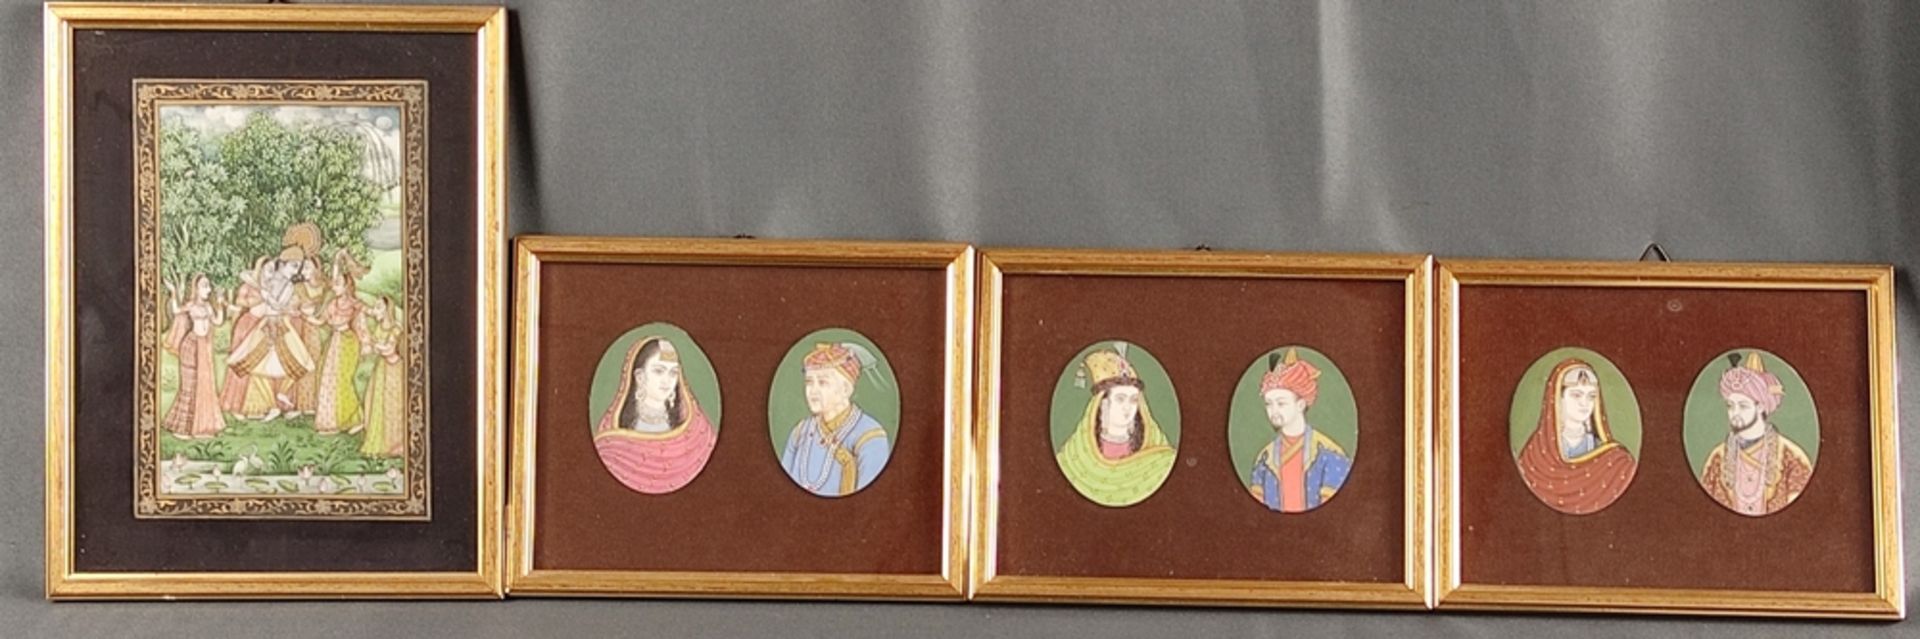 Four Persian-Indian miniatures, three depictions as spouse portraits, grand moguls, inscribed on the